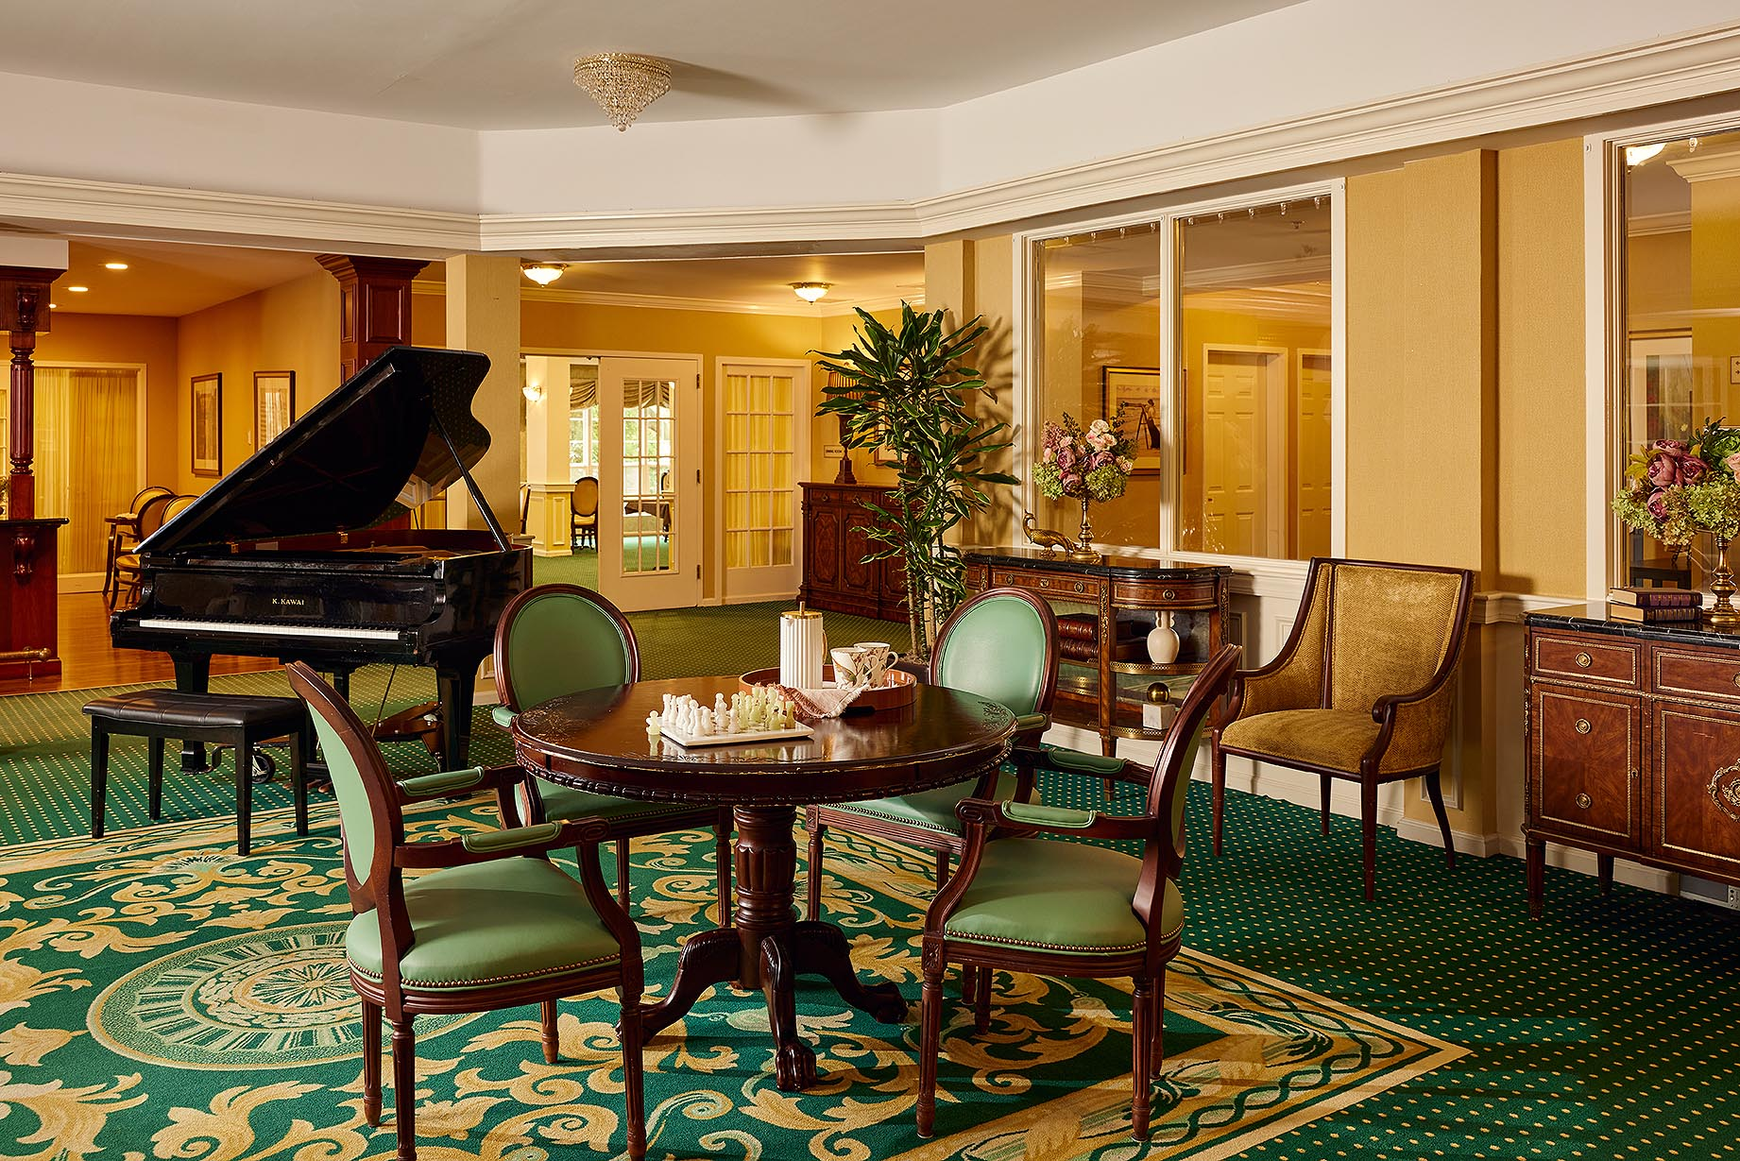 A game of chess and a baby grand piano in the lobby